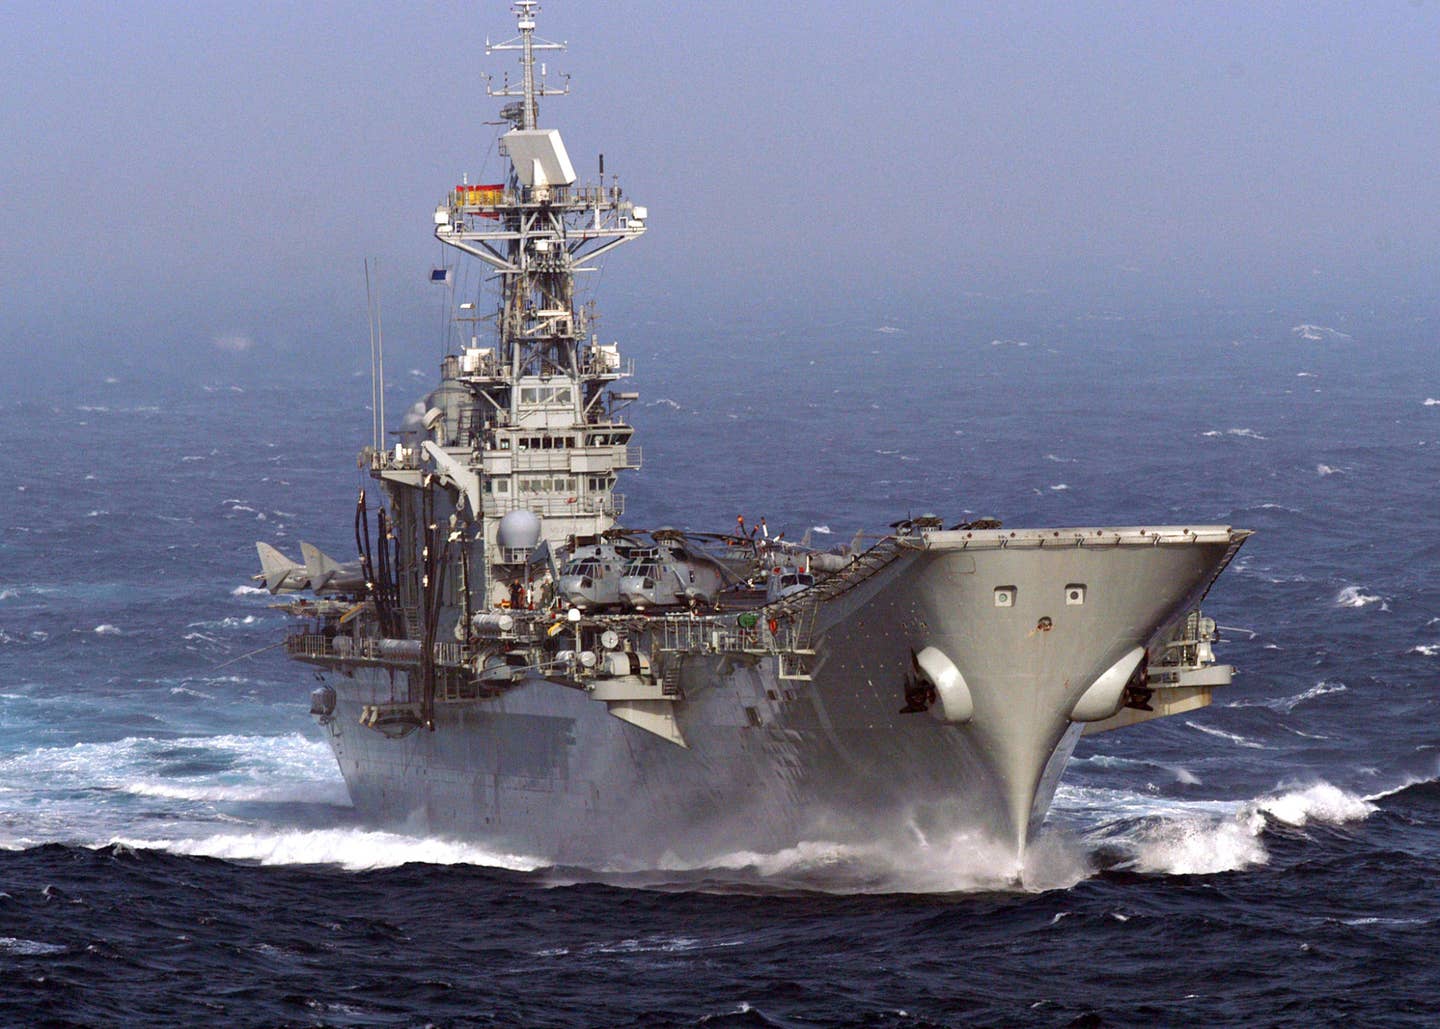 The Spanish aircraft carrier SPS Principe De Asturias (R 11) steams through the Atlantic Ocean while participating in Majestic Eagle 2004. Majestic Eagle is a multinational exercise being conducted off the coast of Morocco. (U.S. Navy photo by Photographer's Mate 3rd Class William Howell)